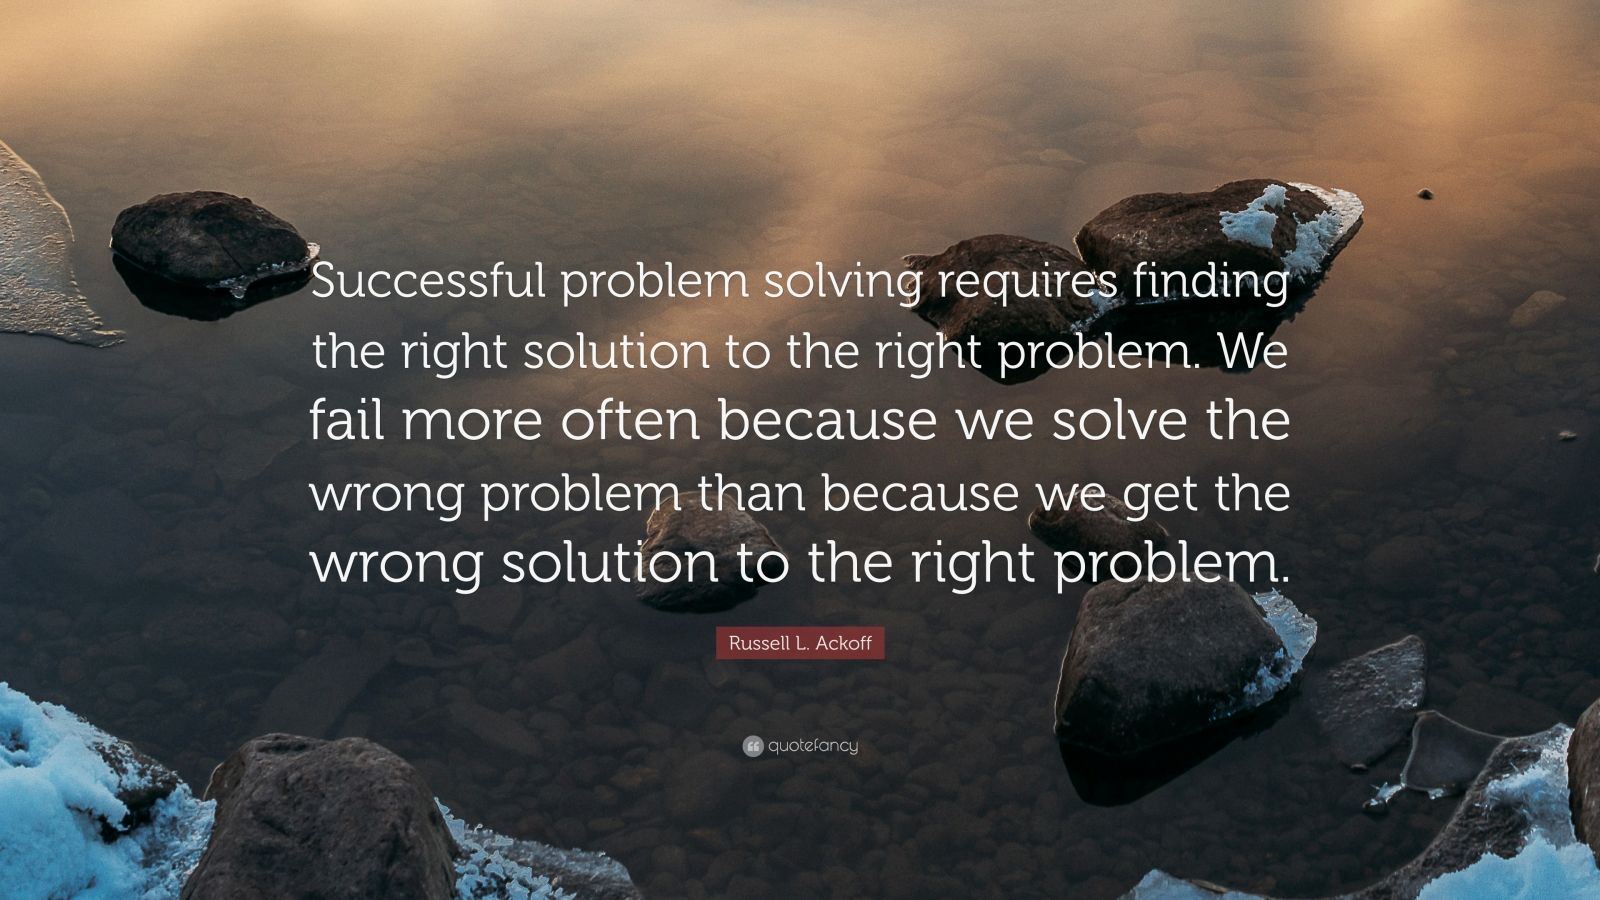 famous quotes on problem solving